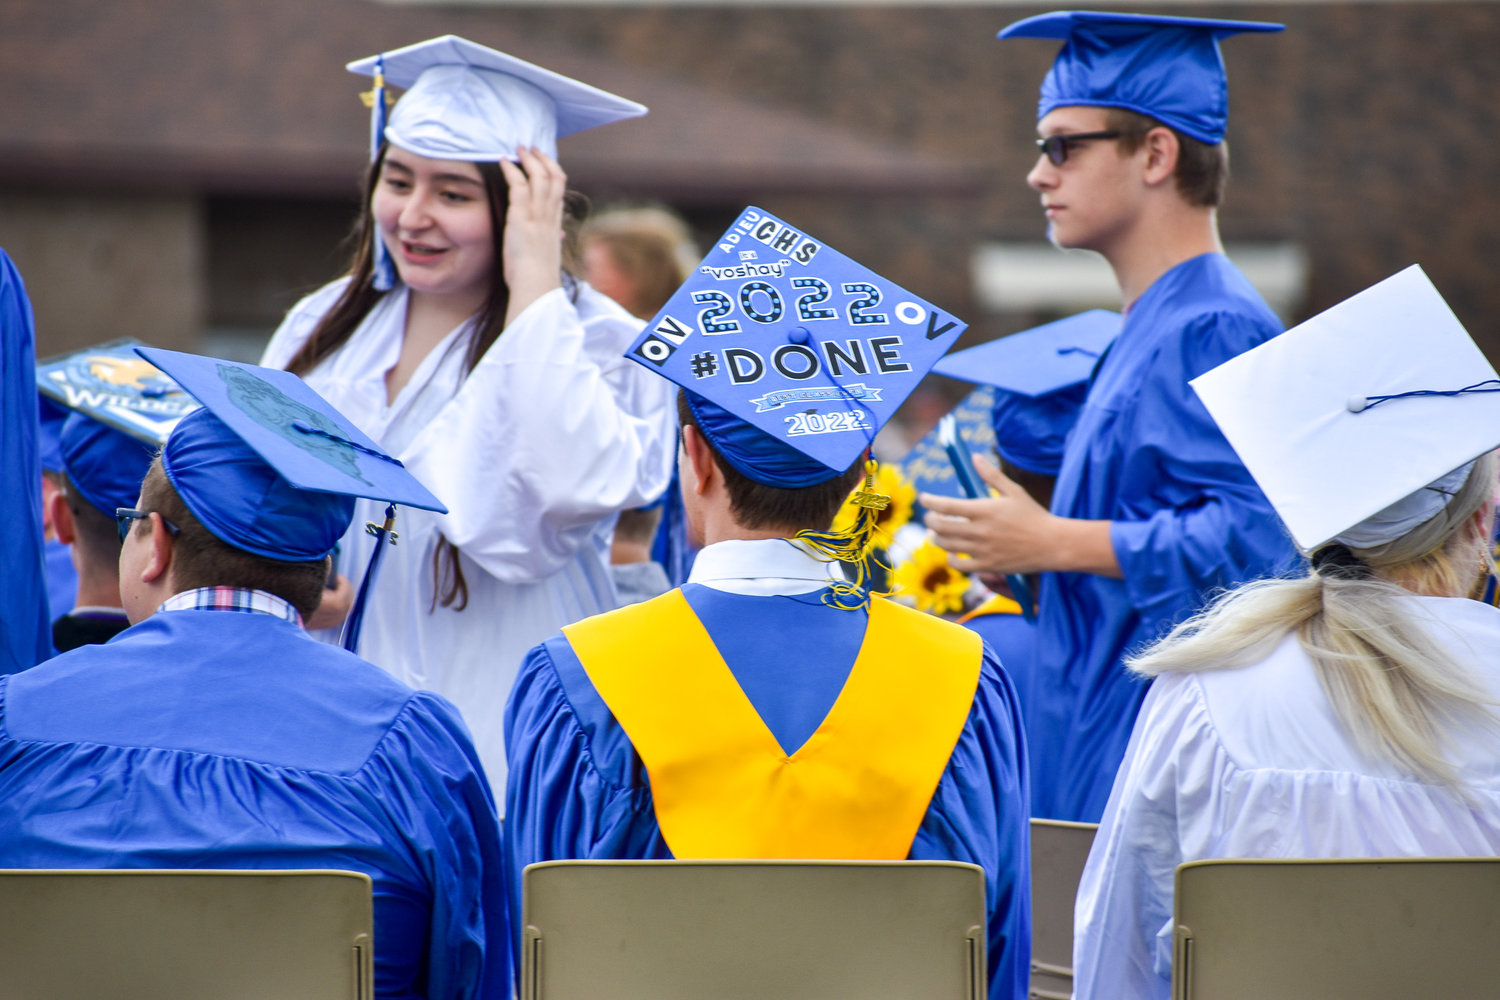 Several seniors decorated their caps for their big day.